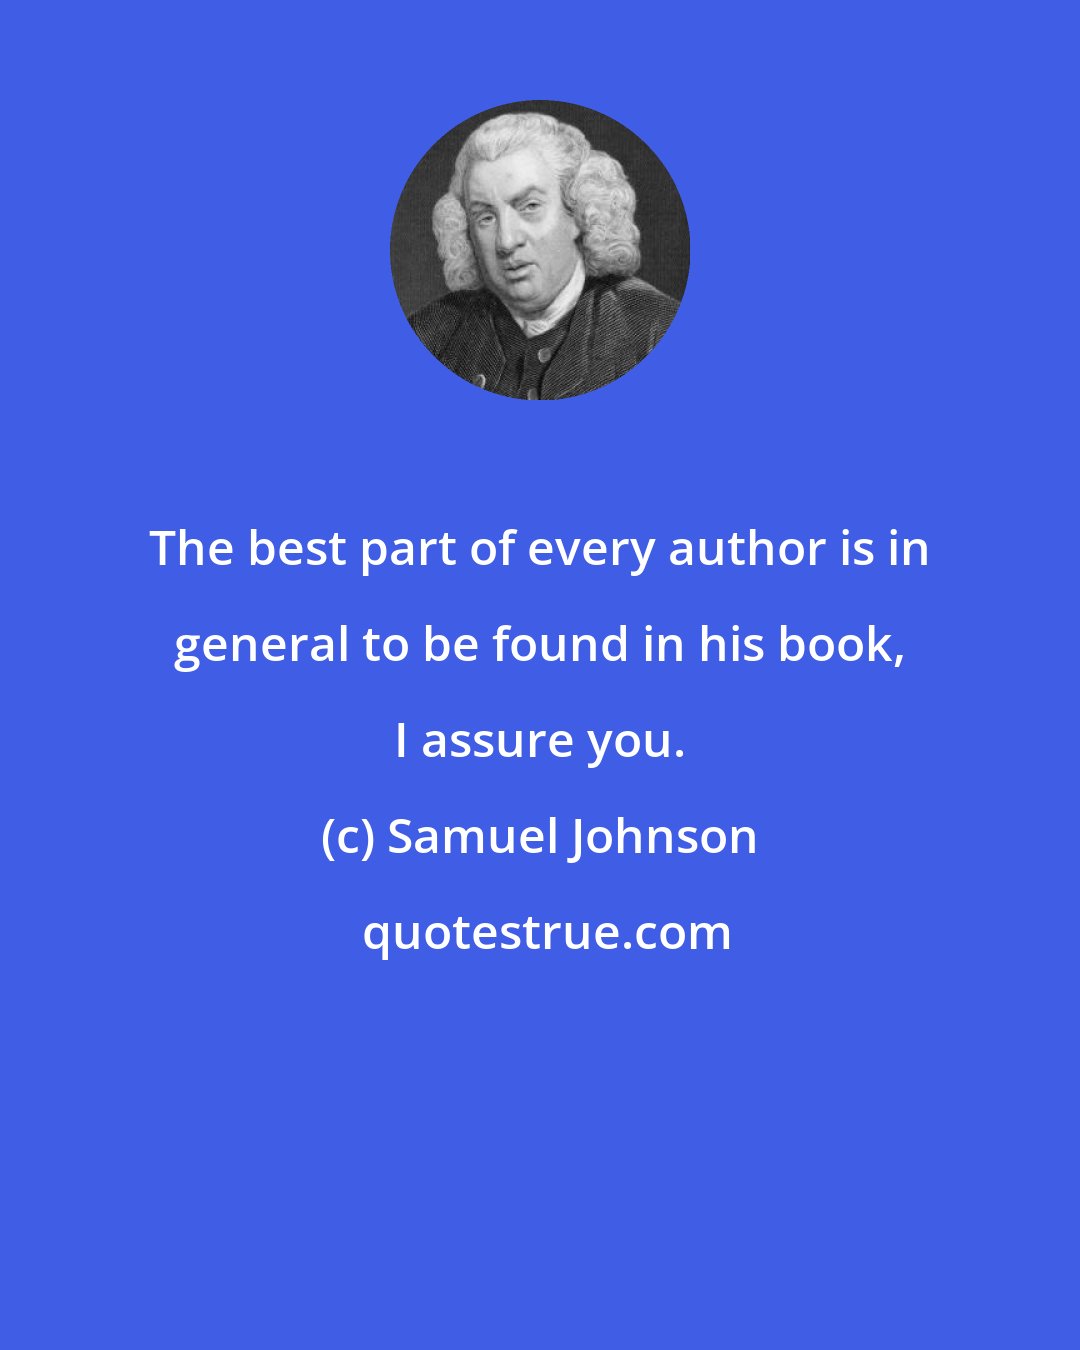 Samuel Johnson: The best part of every author is in general to be found in his book, I assure you.